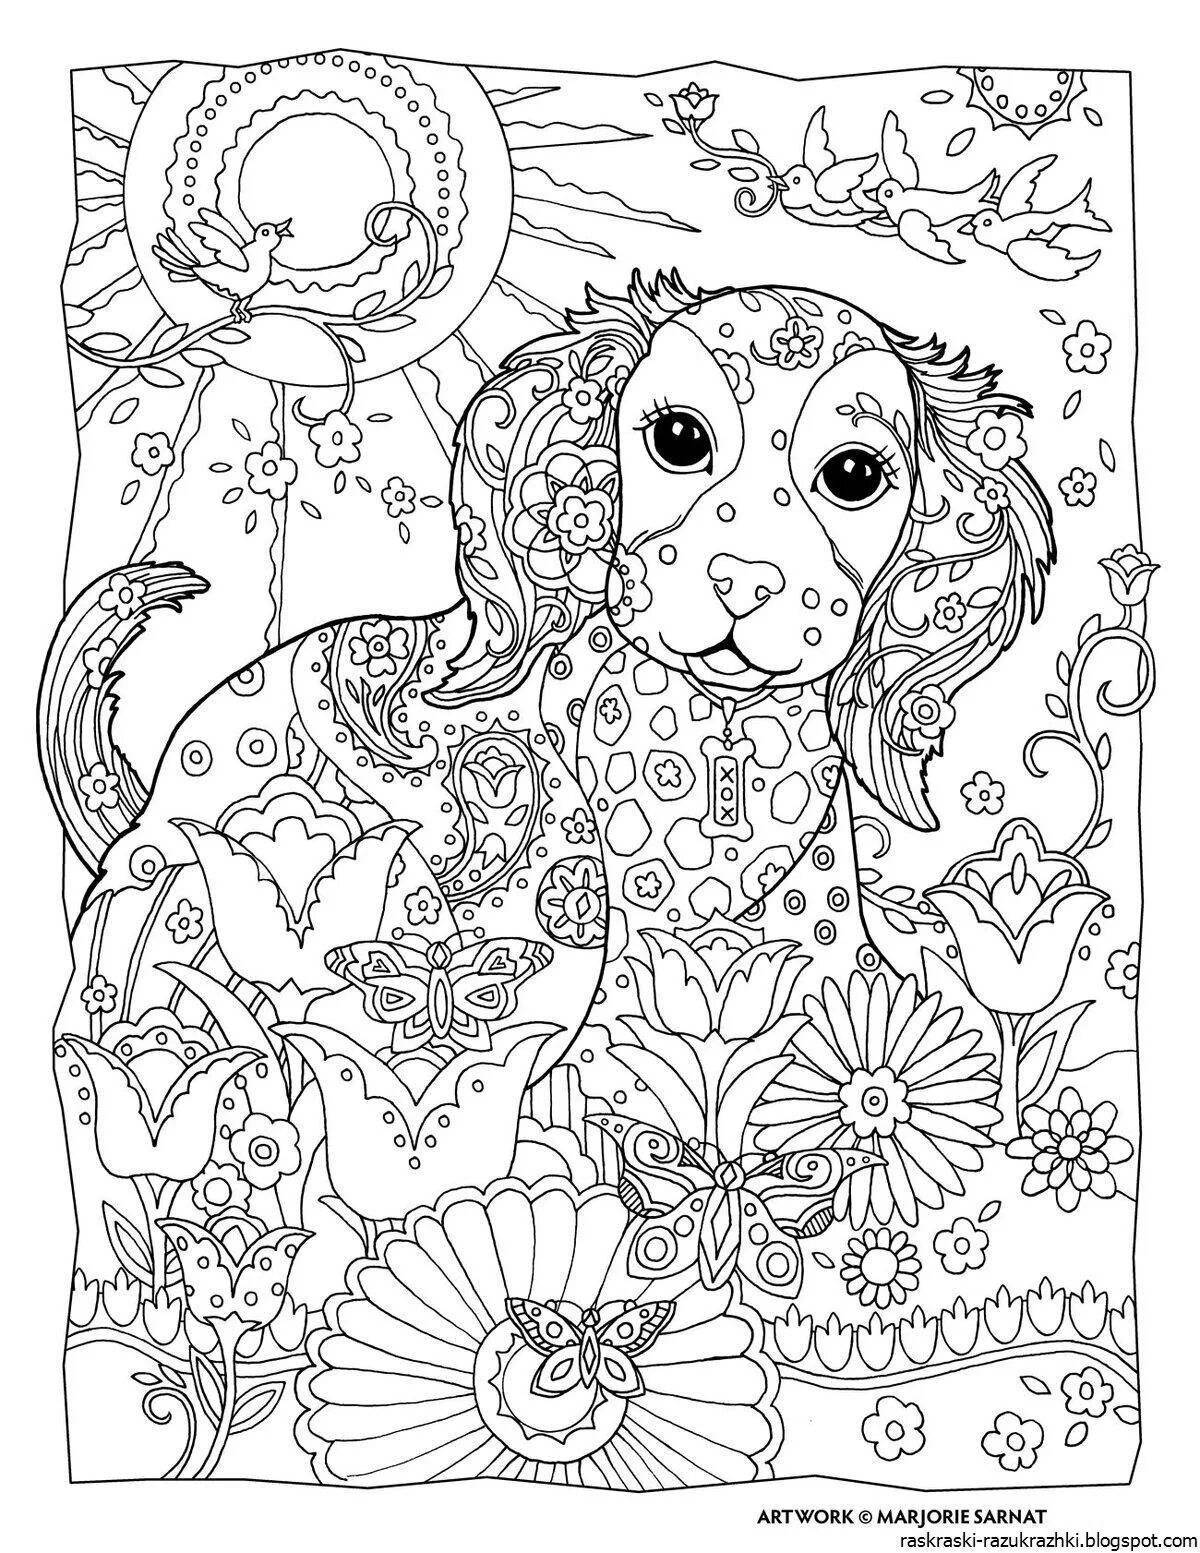 Brilliant coloring for girls 10 years old - very beautiful animals